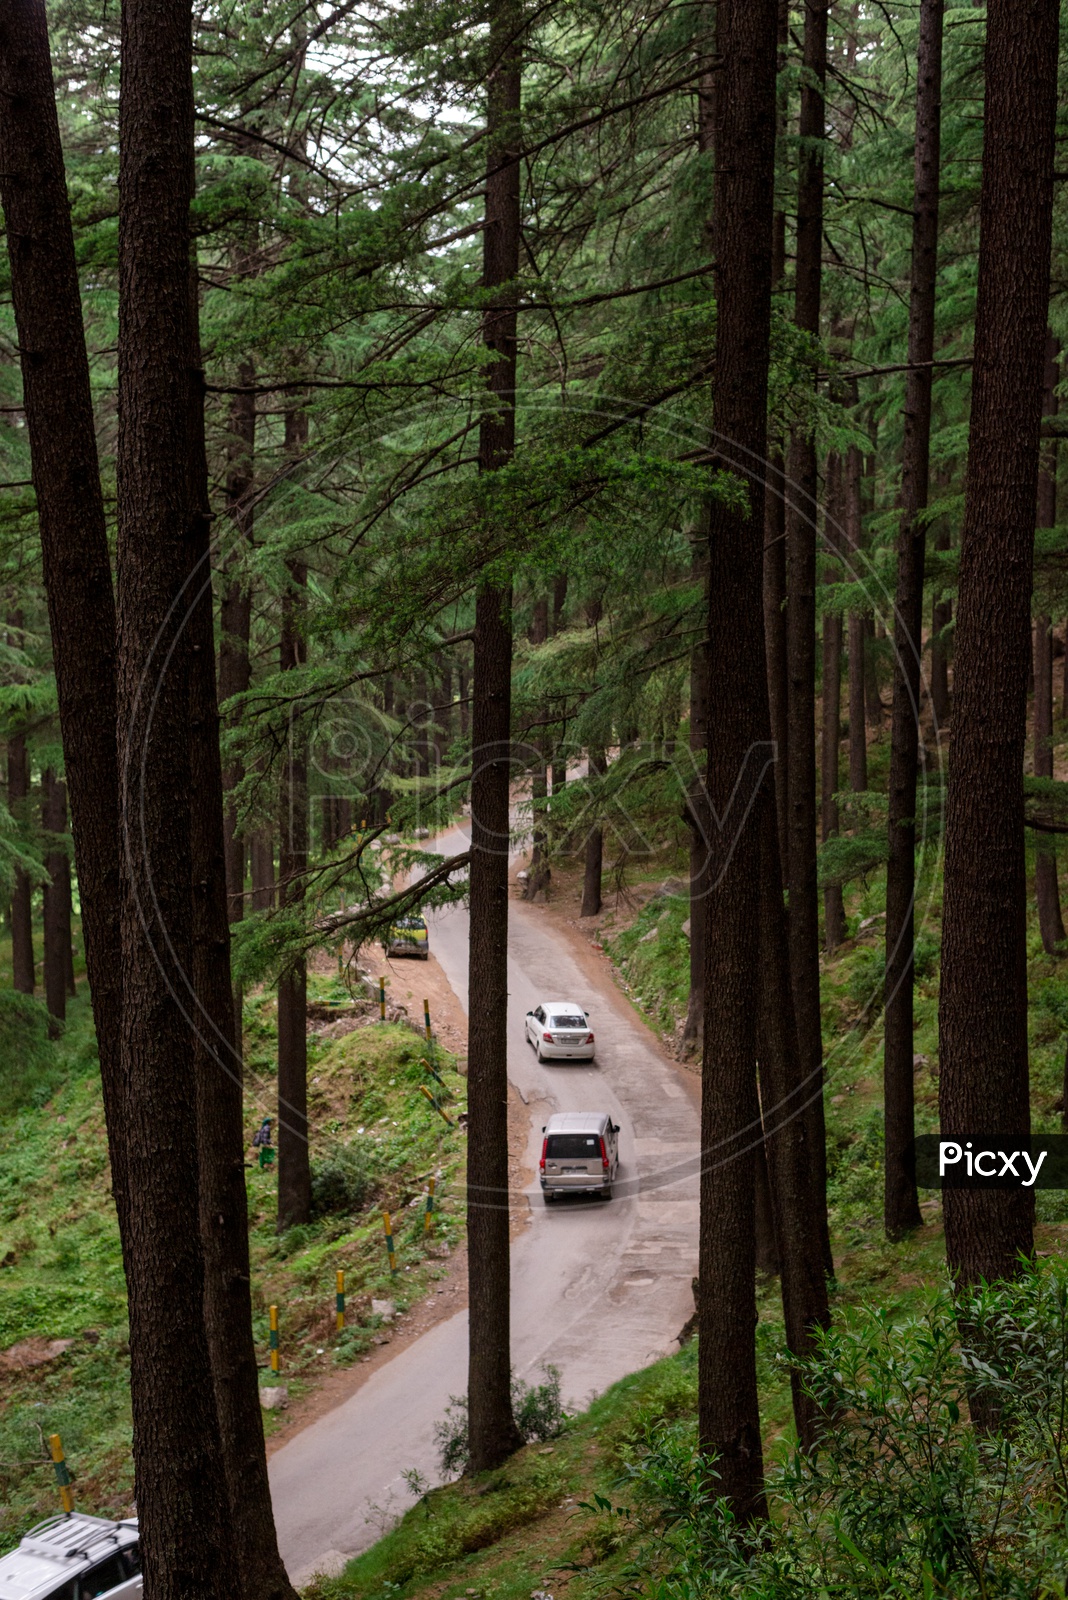 Cars moving along the forest road